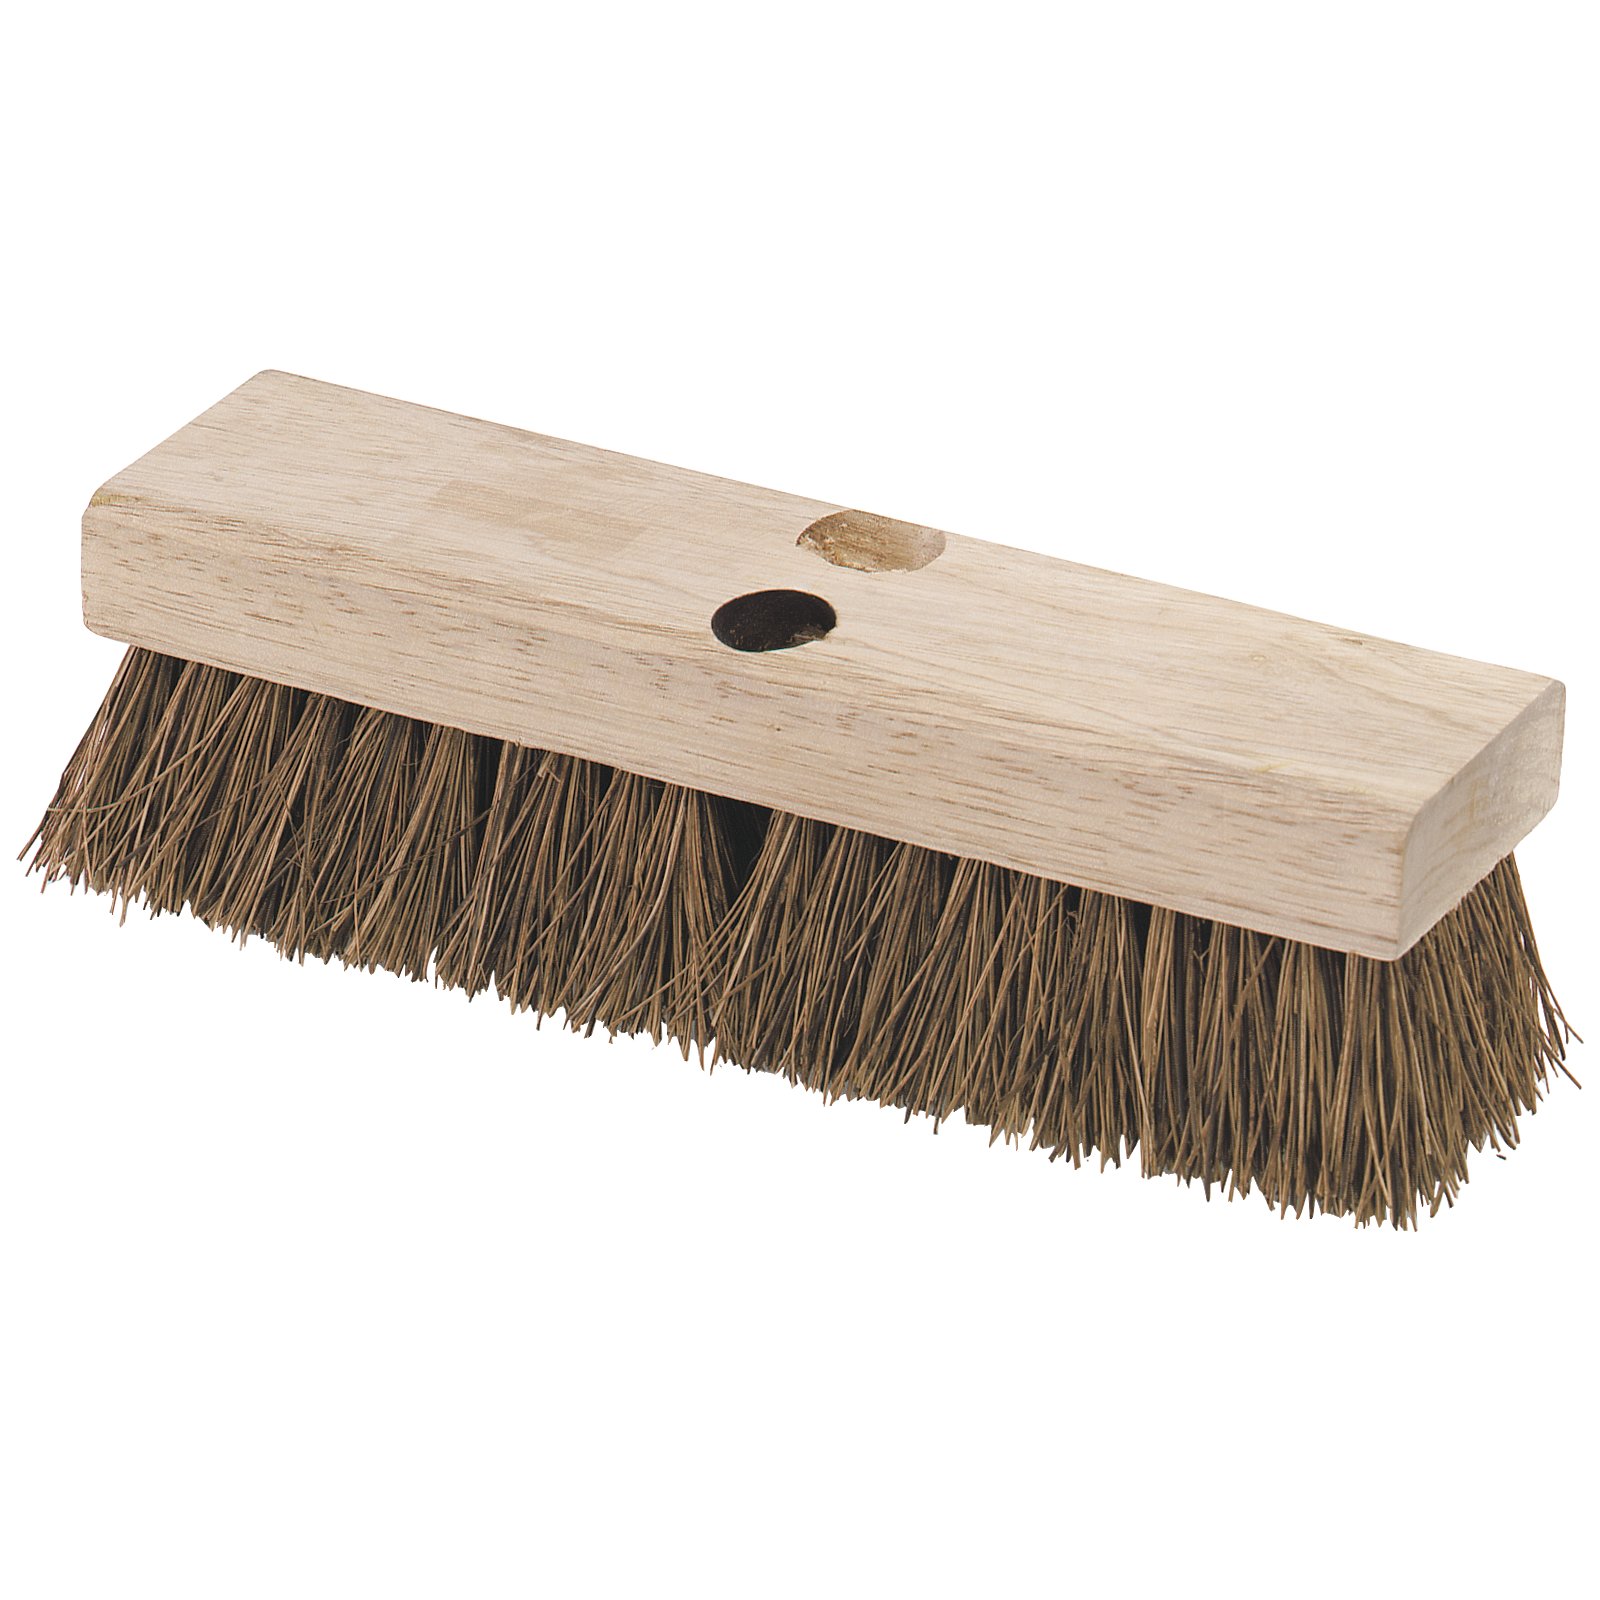 Deck Scrub Brushes - Zephyr Manufacturing Co